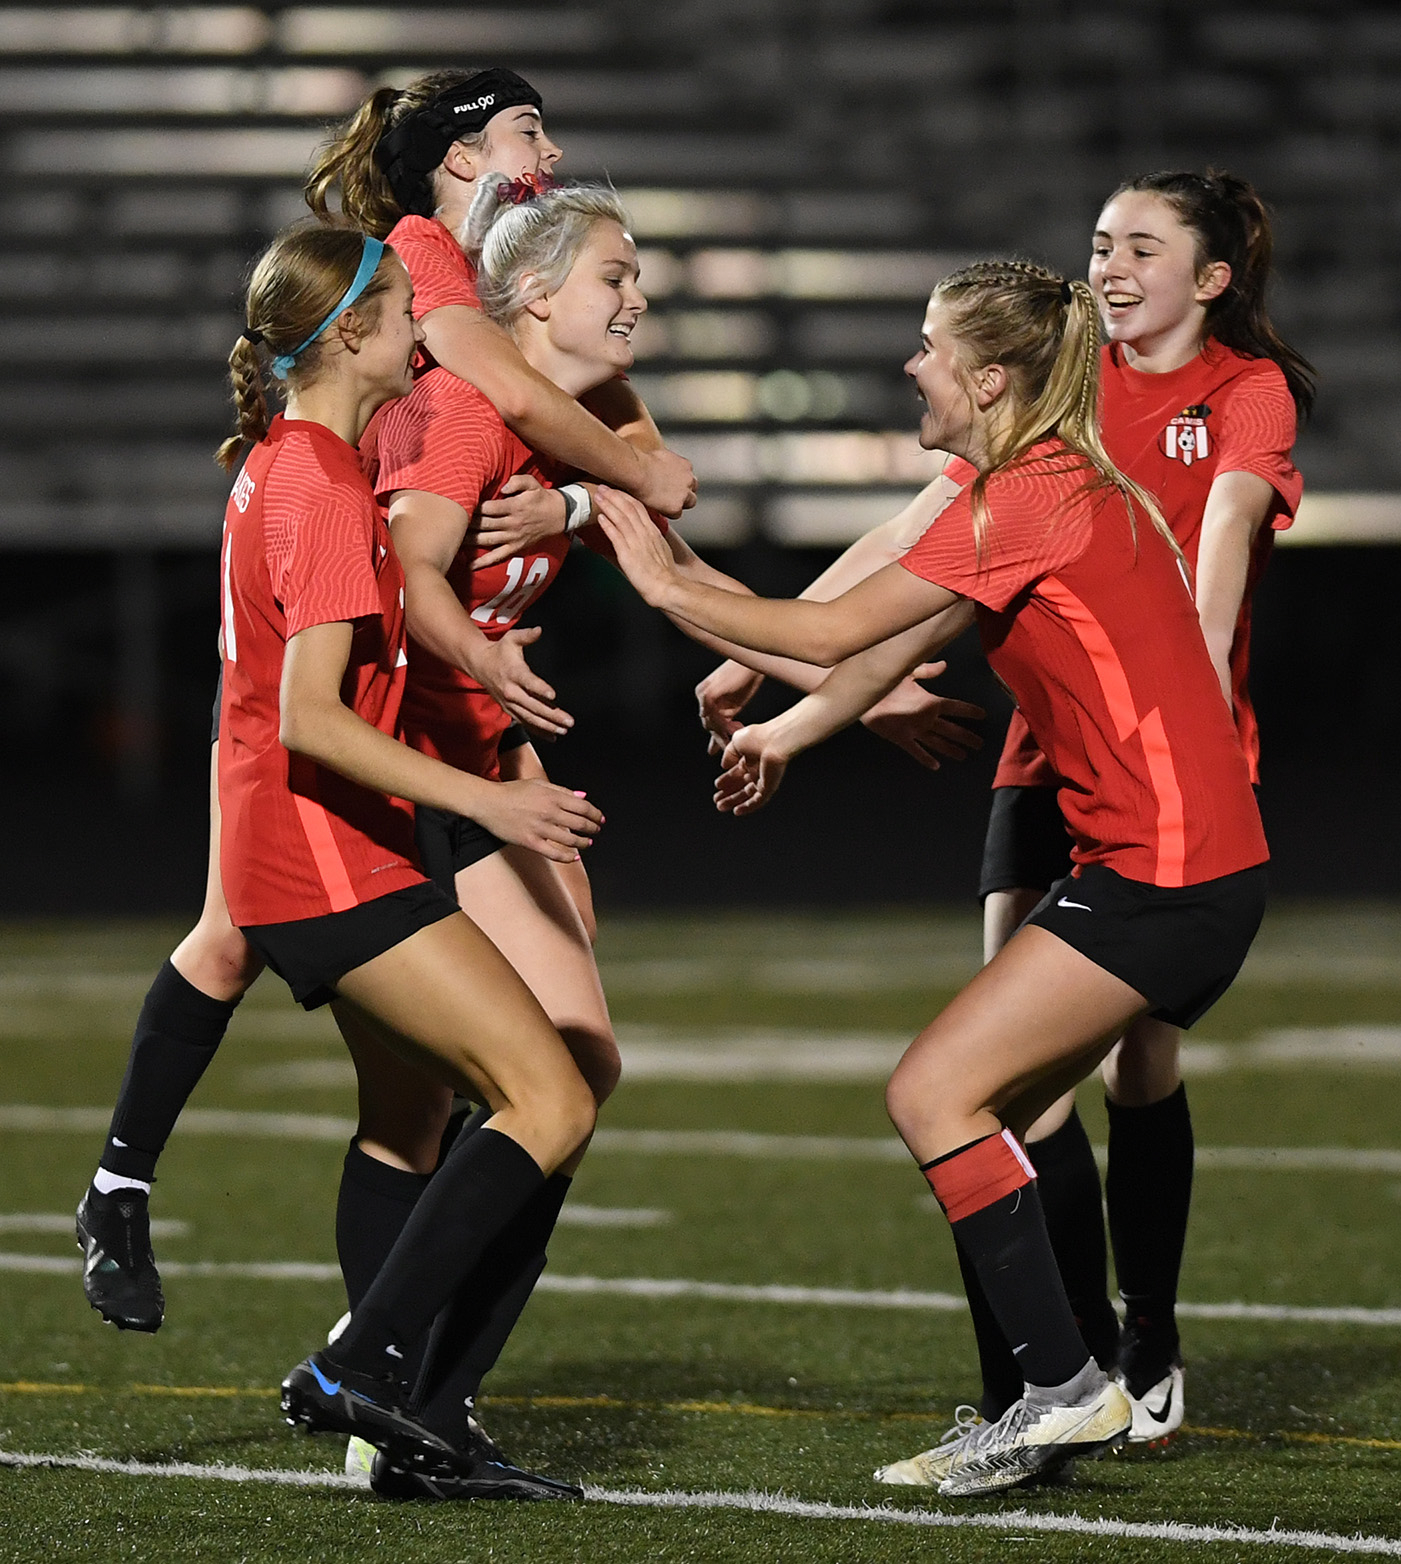 Teammates swarm Camas senior Emerson Grafton, third from left, after a goal Wednesday, Nov. 10, 2021, during the Papermakers' 2-0 win against Kennedy Catholic in the first round of the 4A state tournament at Doc Harris Stadium in Camas.